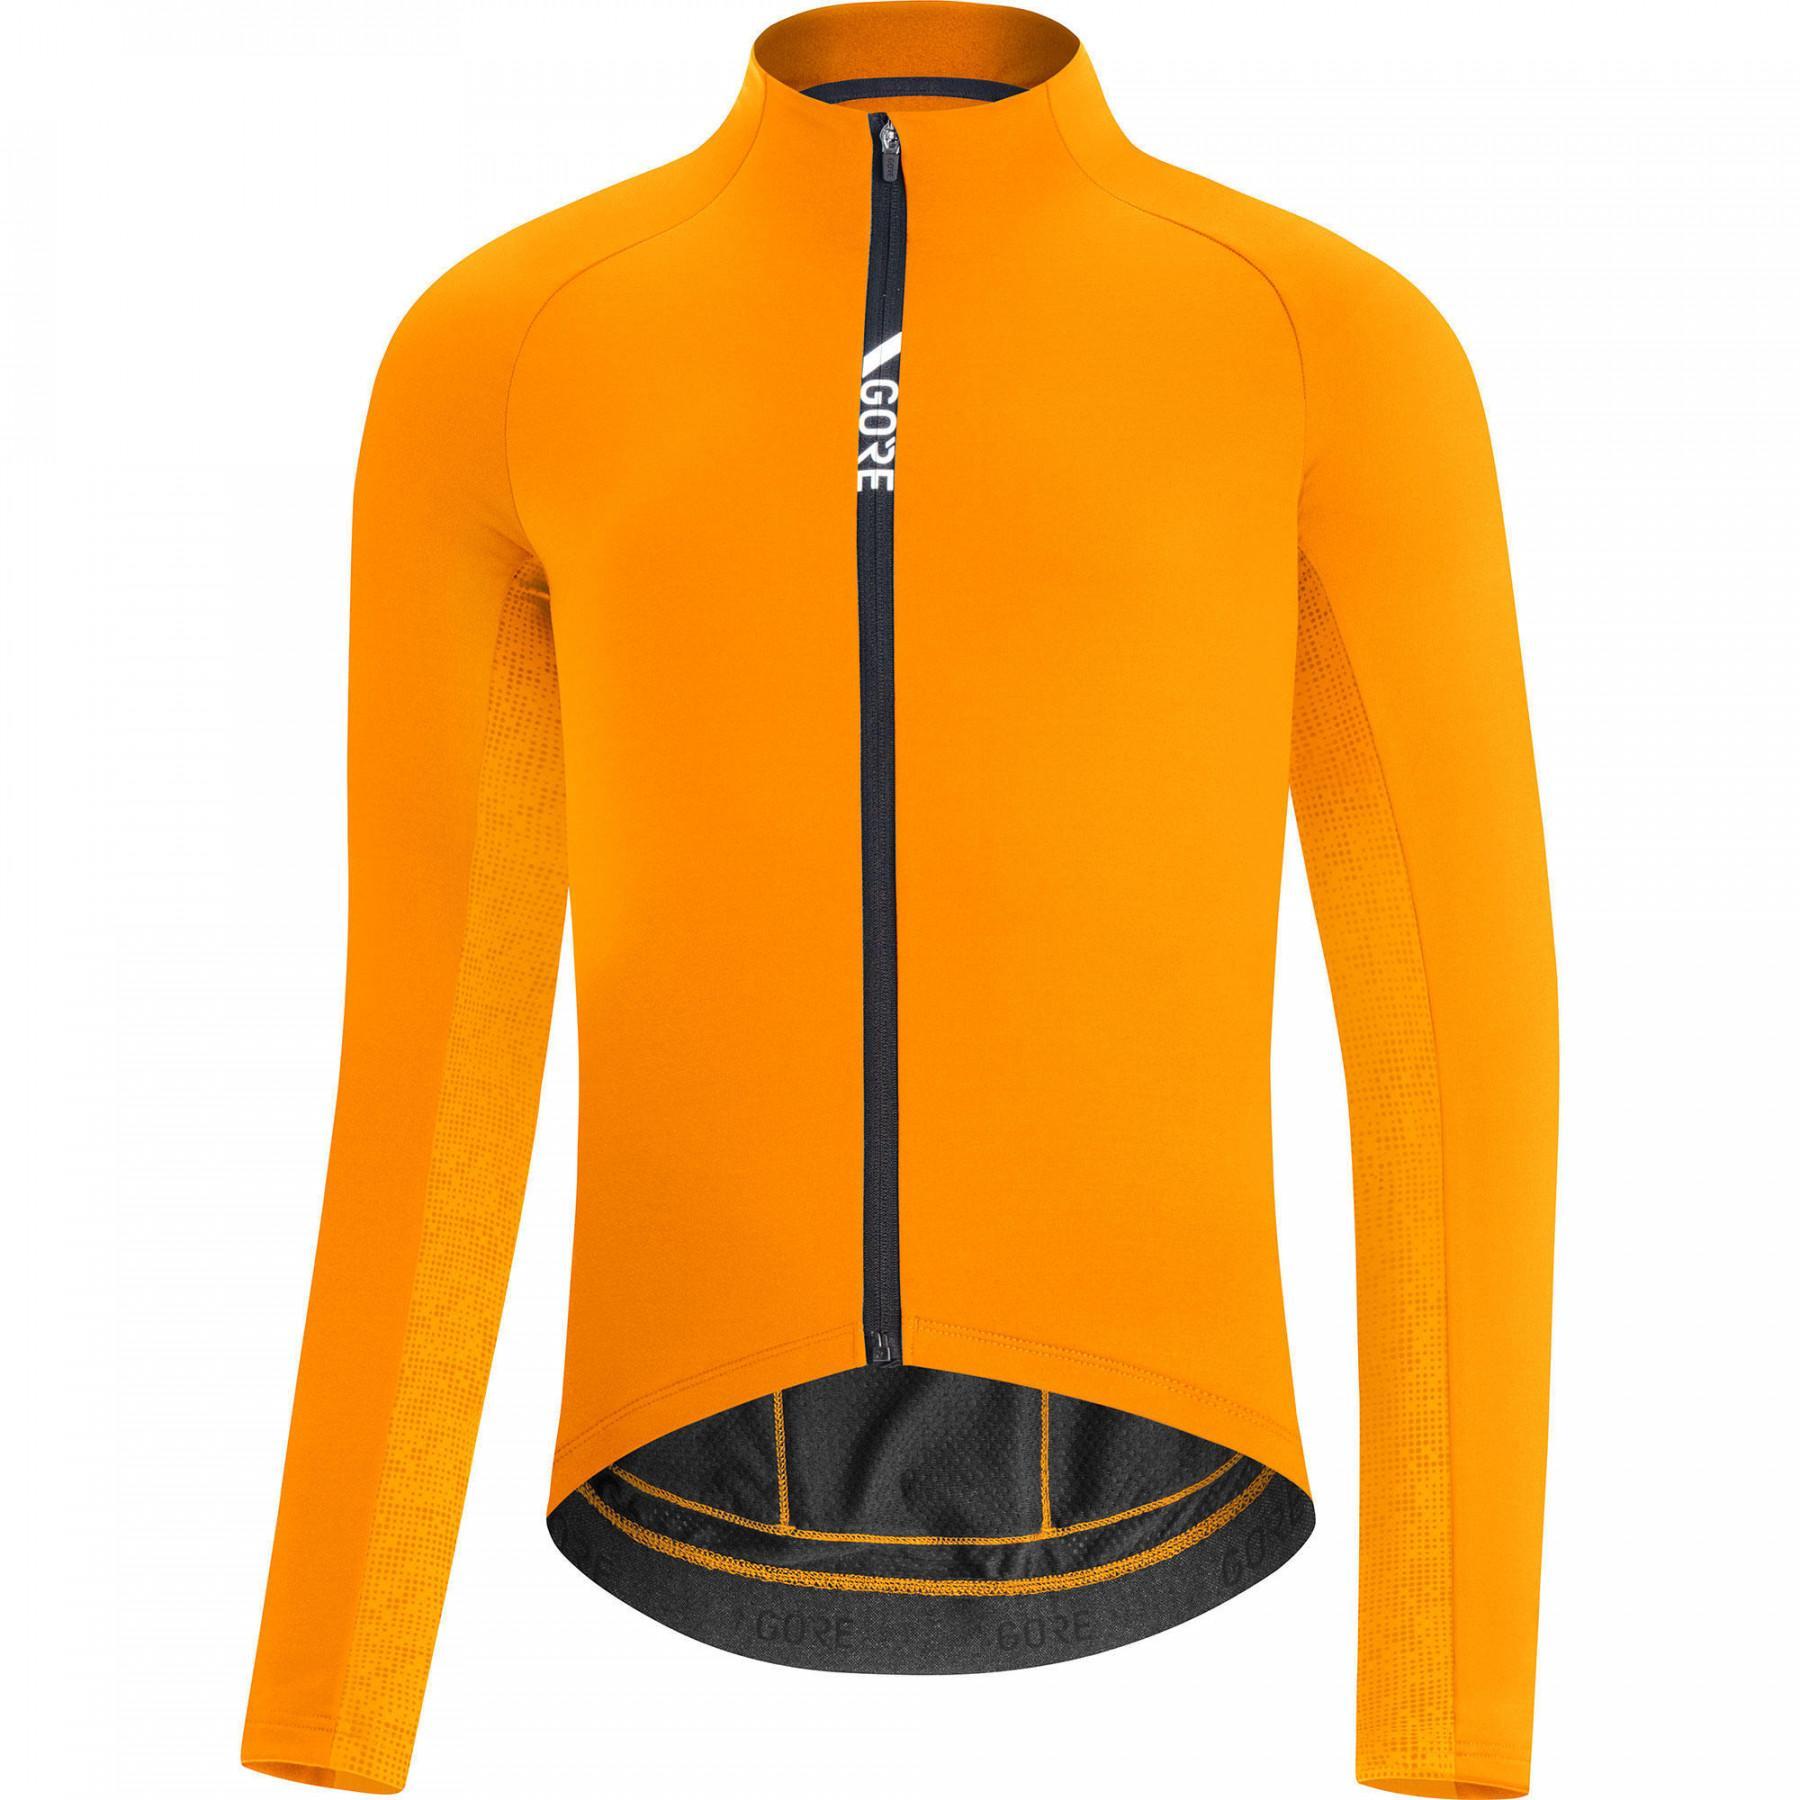 Maillot Gore C5 Thermo